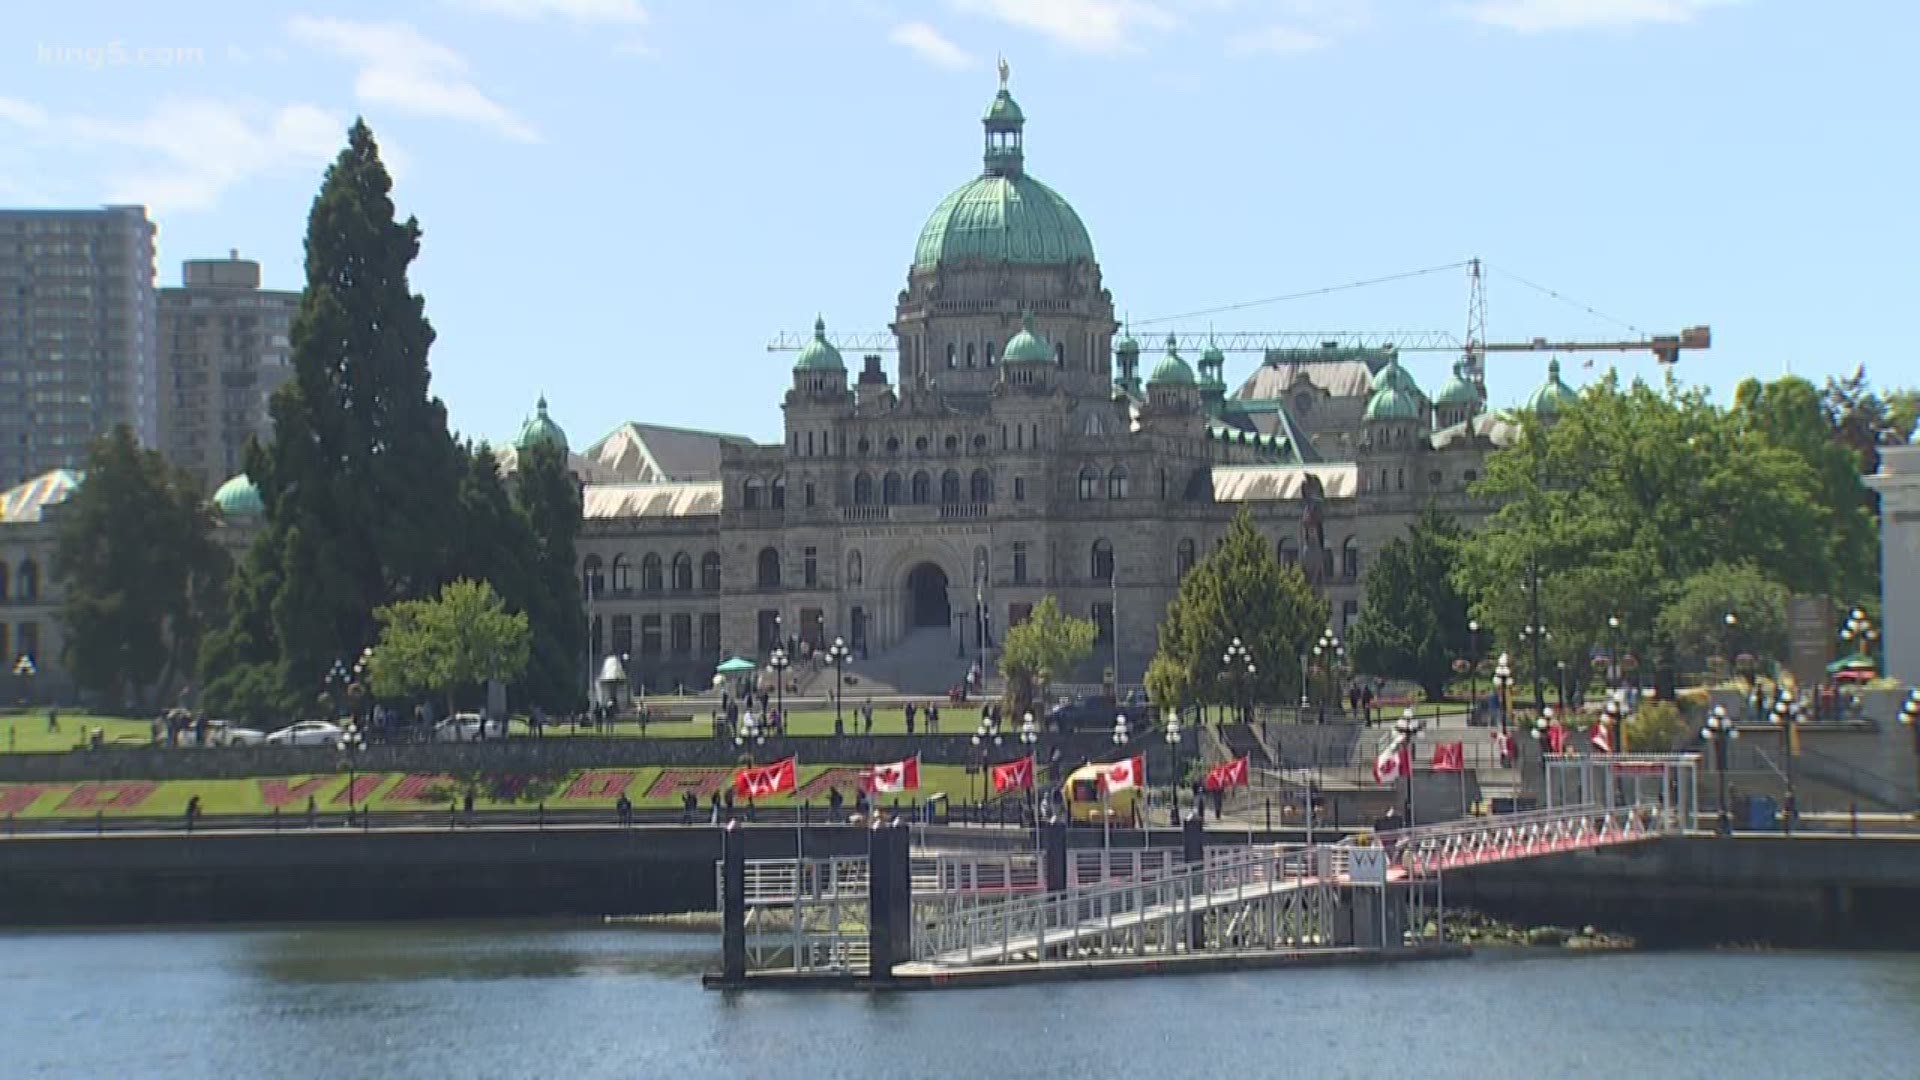 Victoria, British Columbia is finally going to start treating its sewage before discharging it into waterways. For decades, people in Washington state have urged the Canadians to clean up their act. Some have even called for travel boycotts.